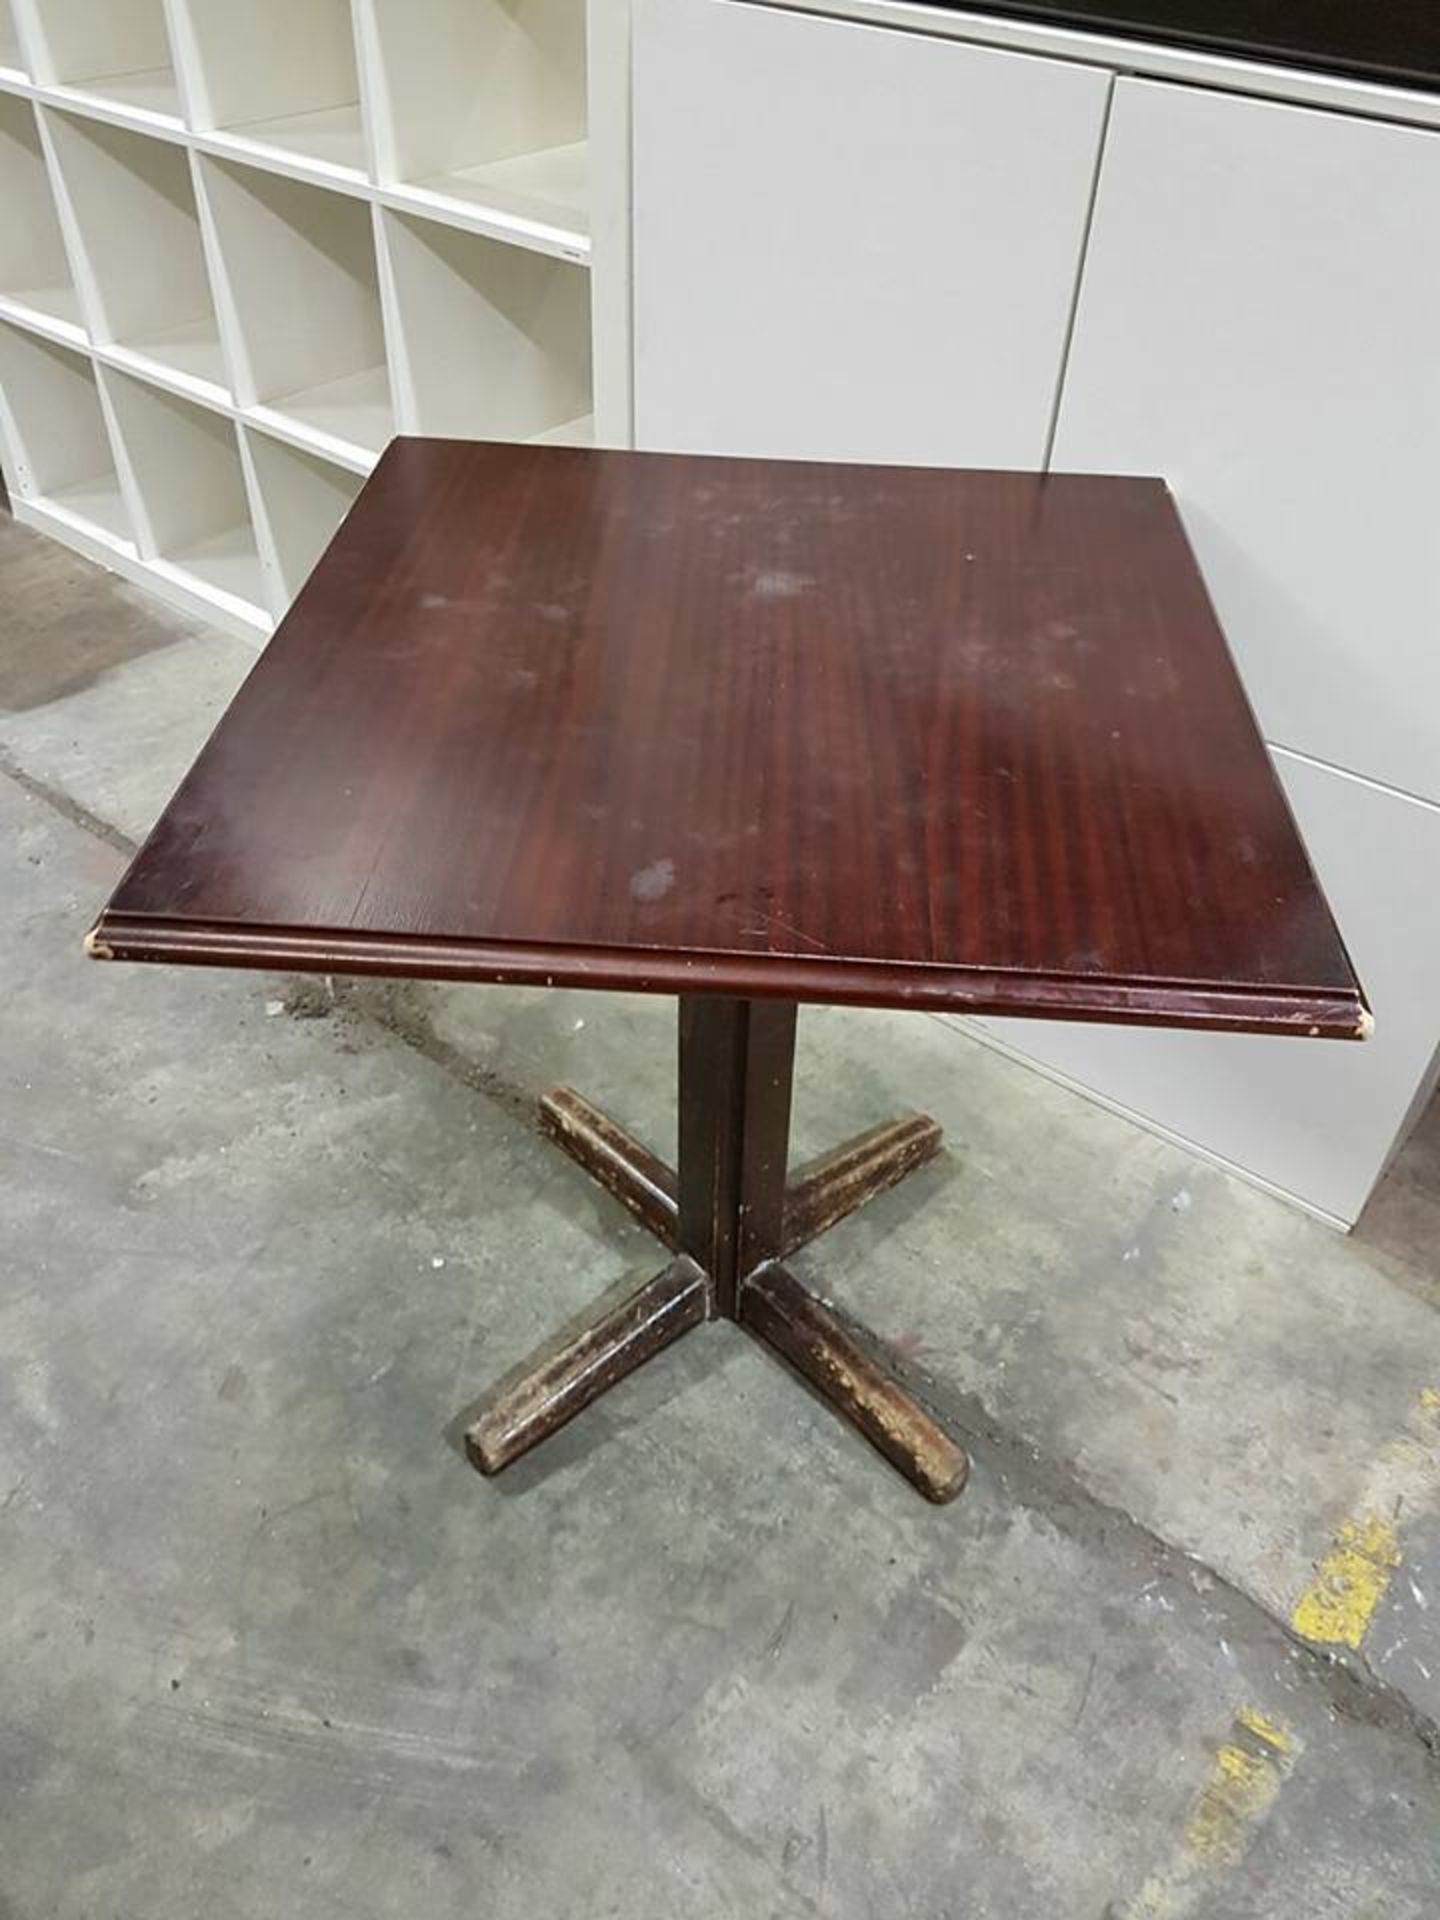 5 x square dining tables 680mm x 680mm x 730mm